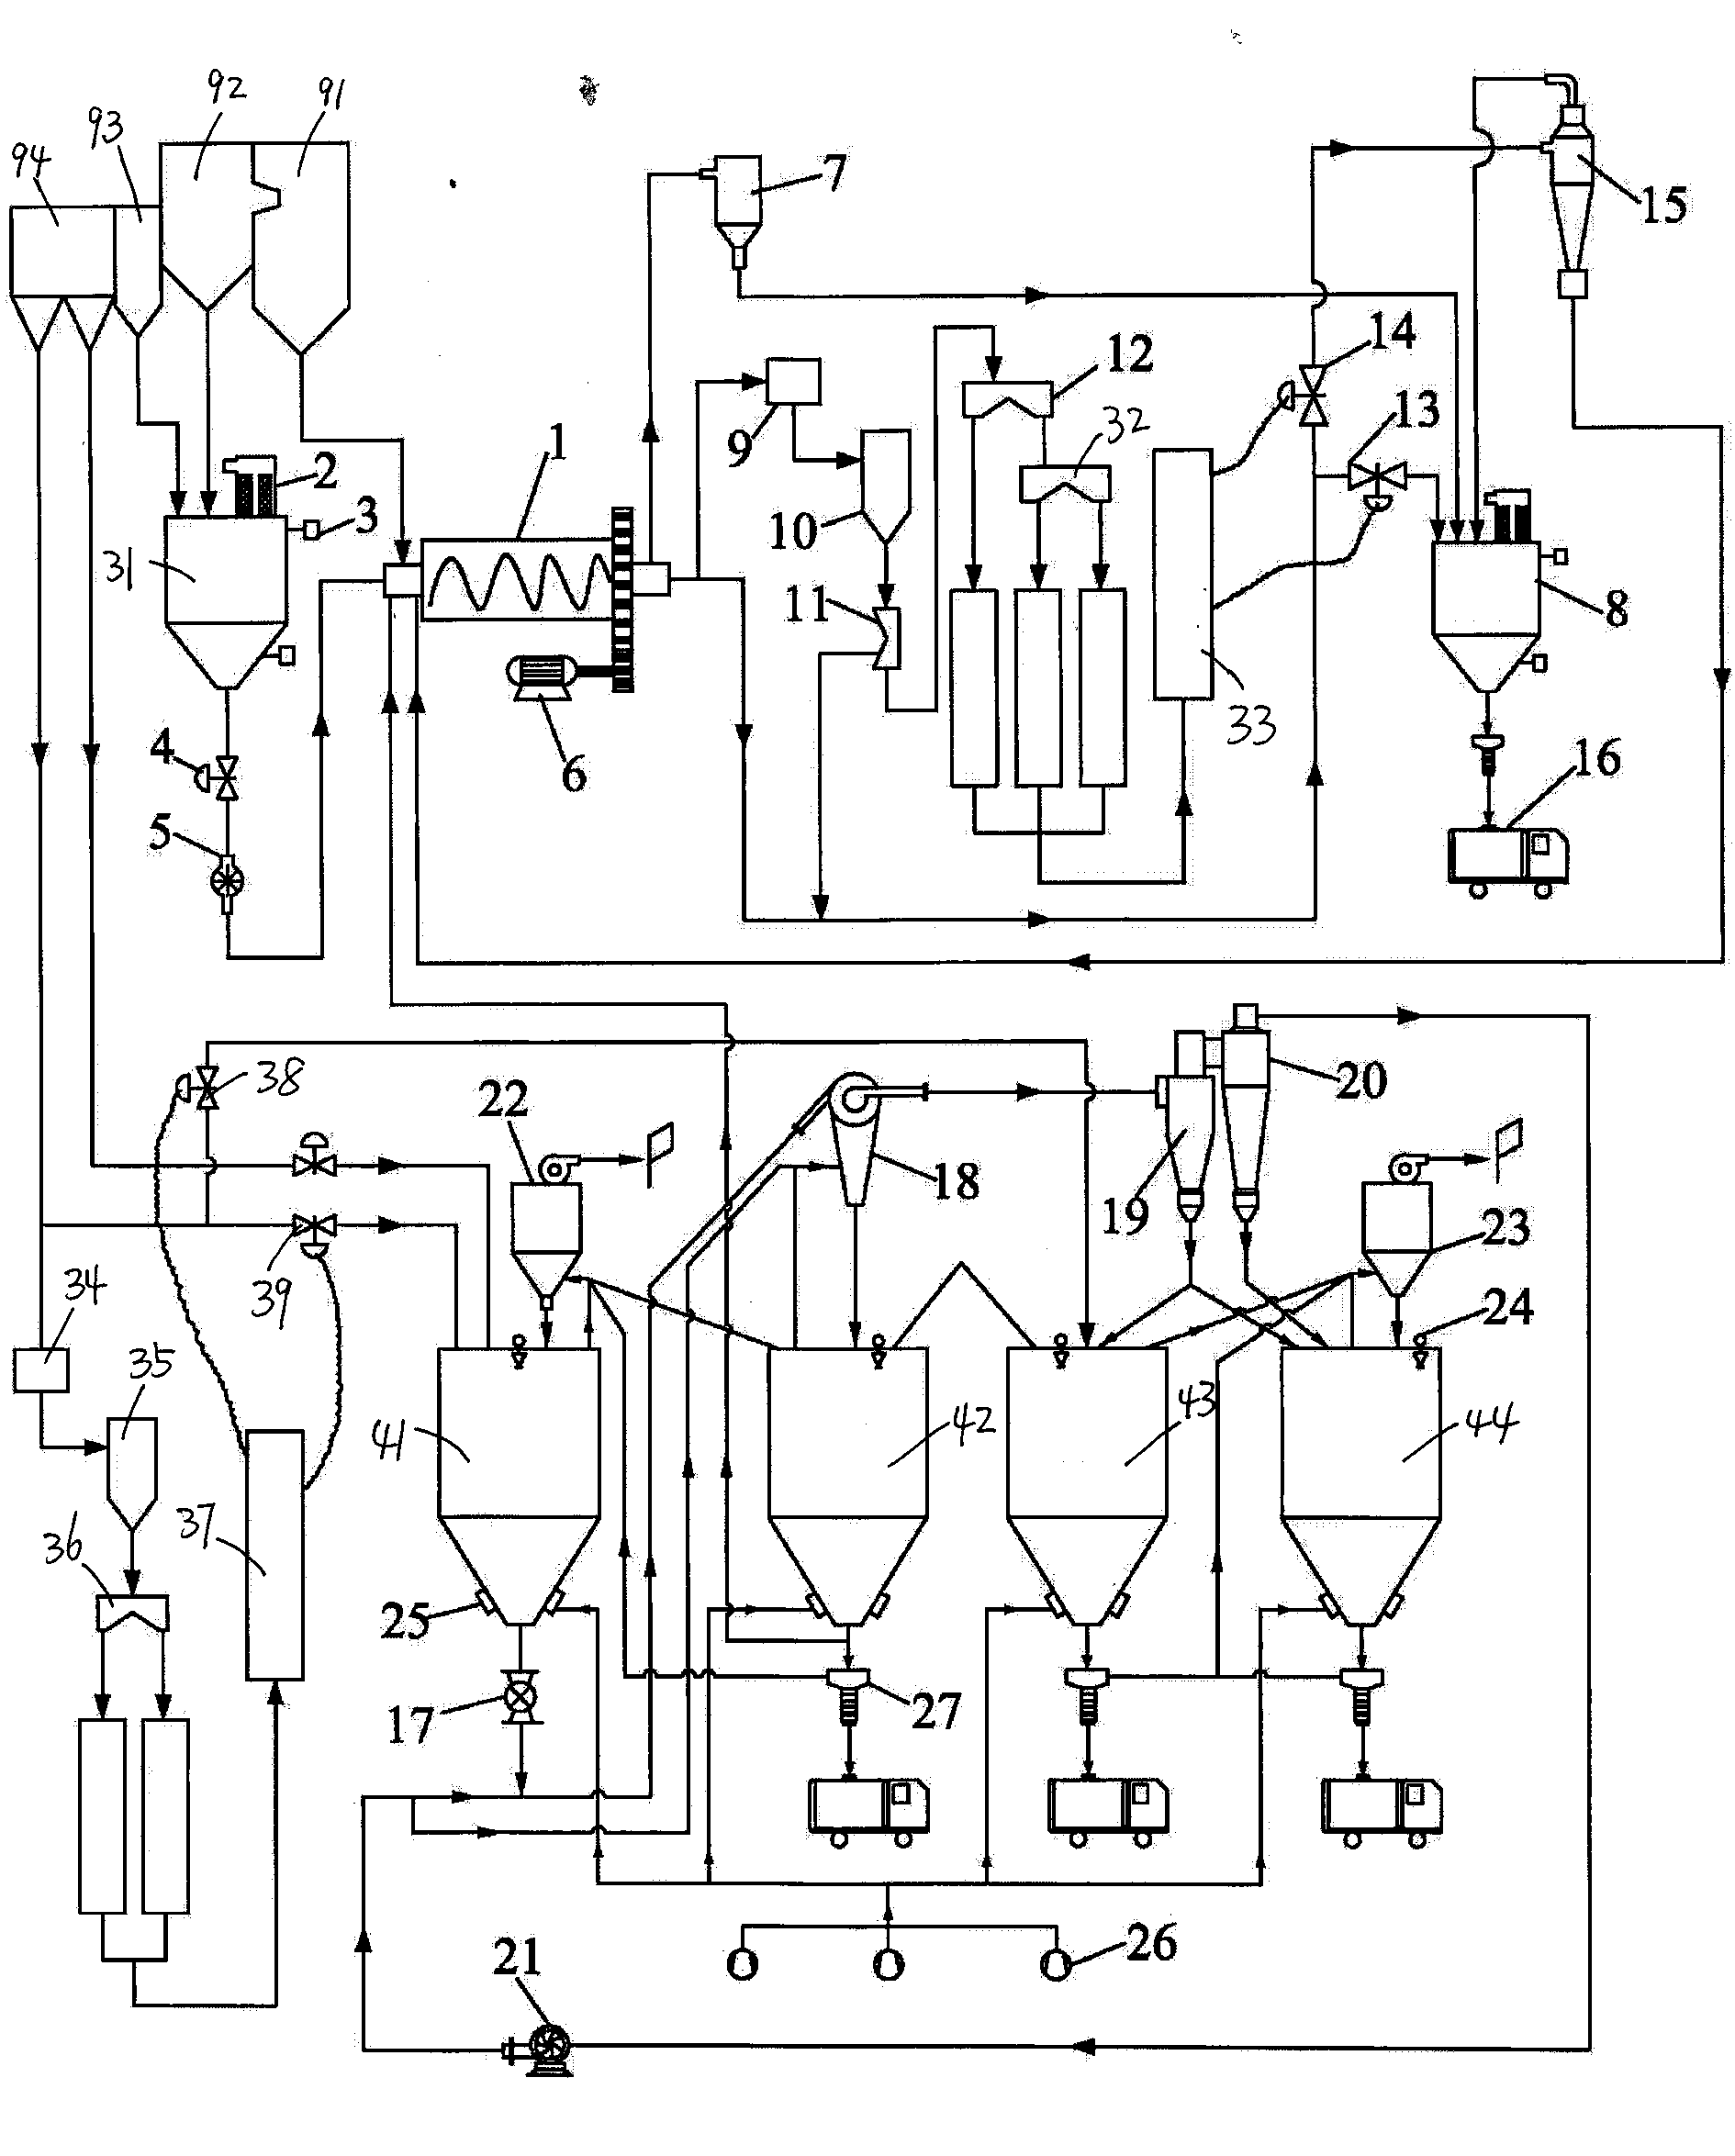 System and method for efficiently and economically processing coal ash and bottom slag of coal-fired units of power plants